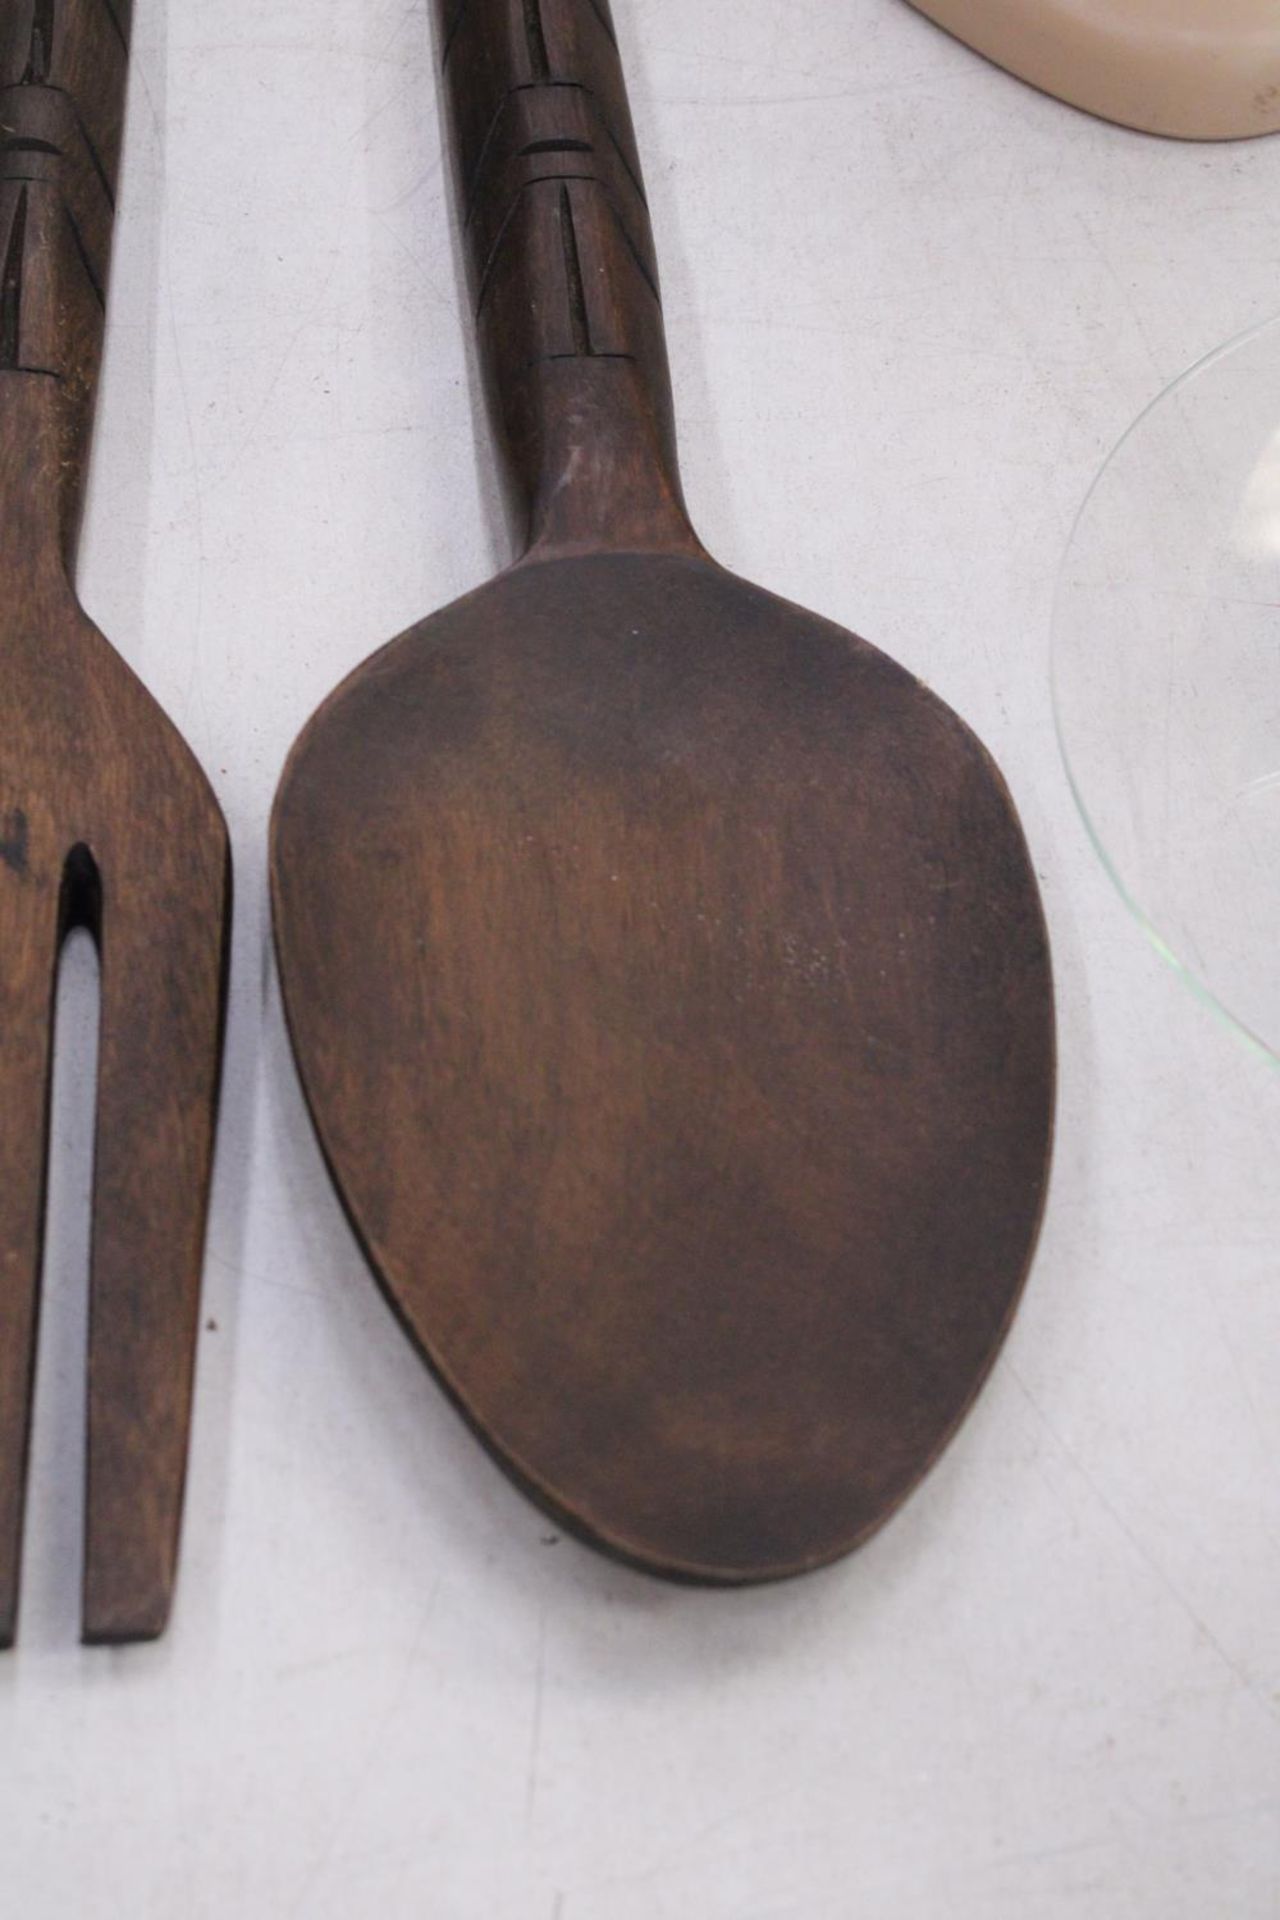 TWO LARGE WOODEN WALL DECORATIONS OF A FORK AND SPOON - Image 4 of 6